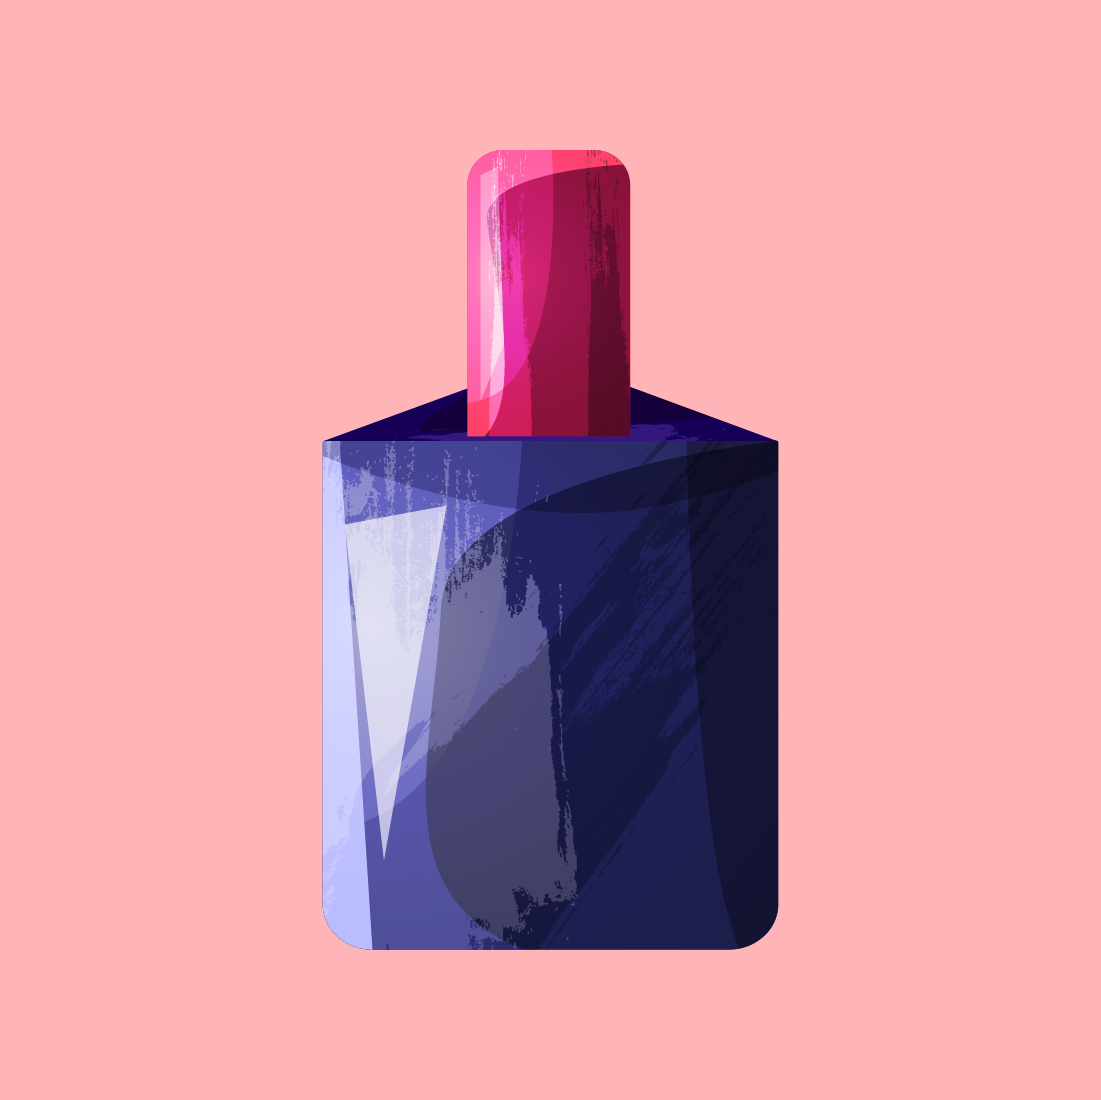 Beauty Bottle Perfume Packaging Illustrations preview image.